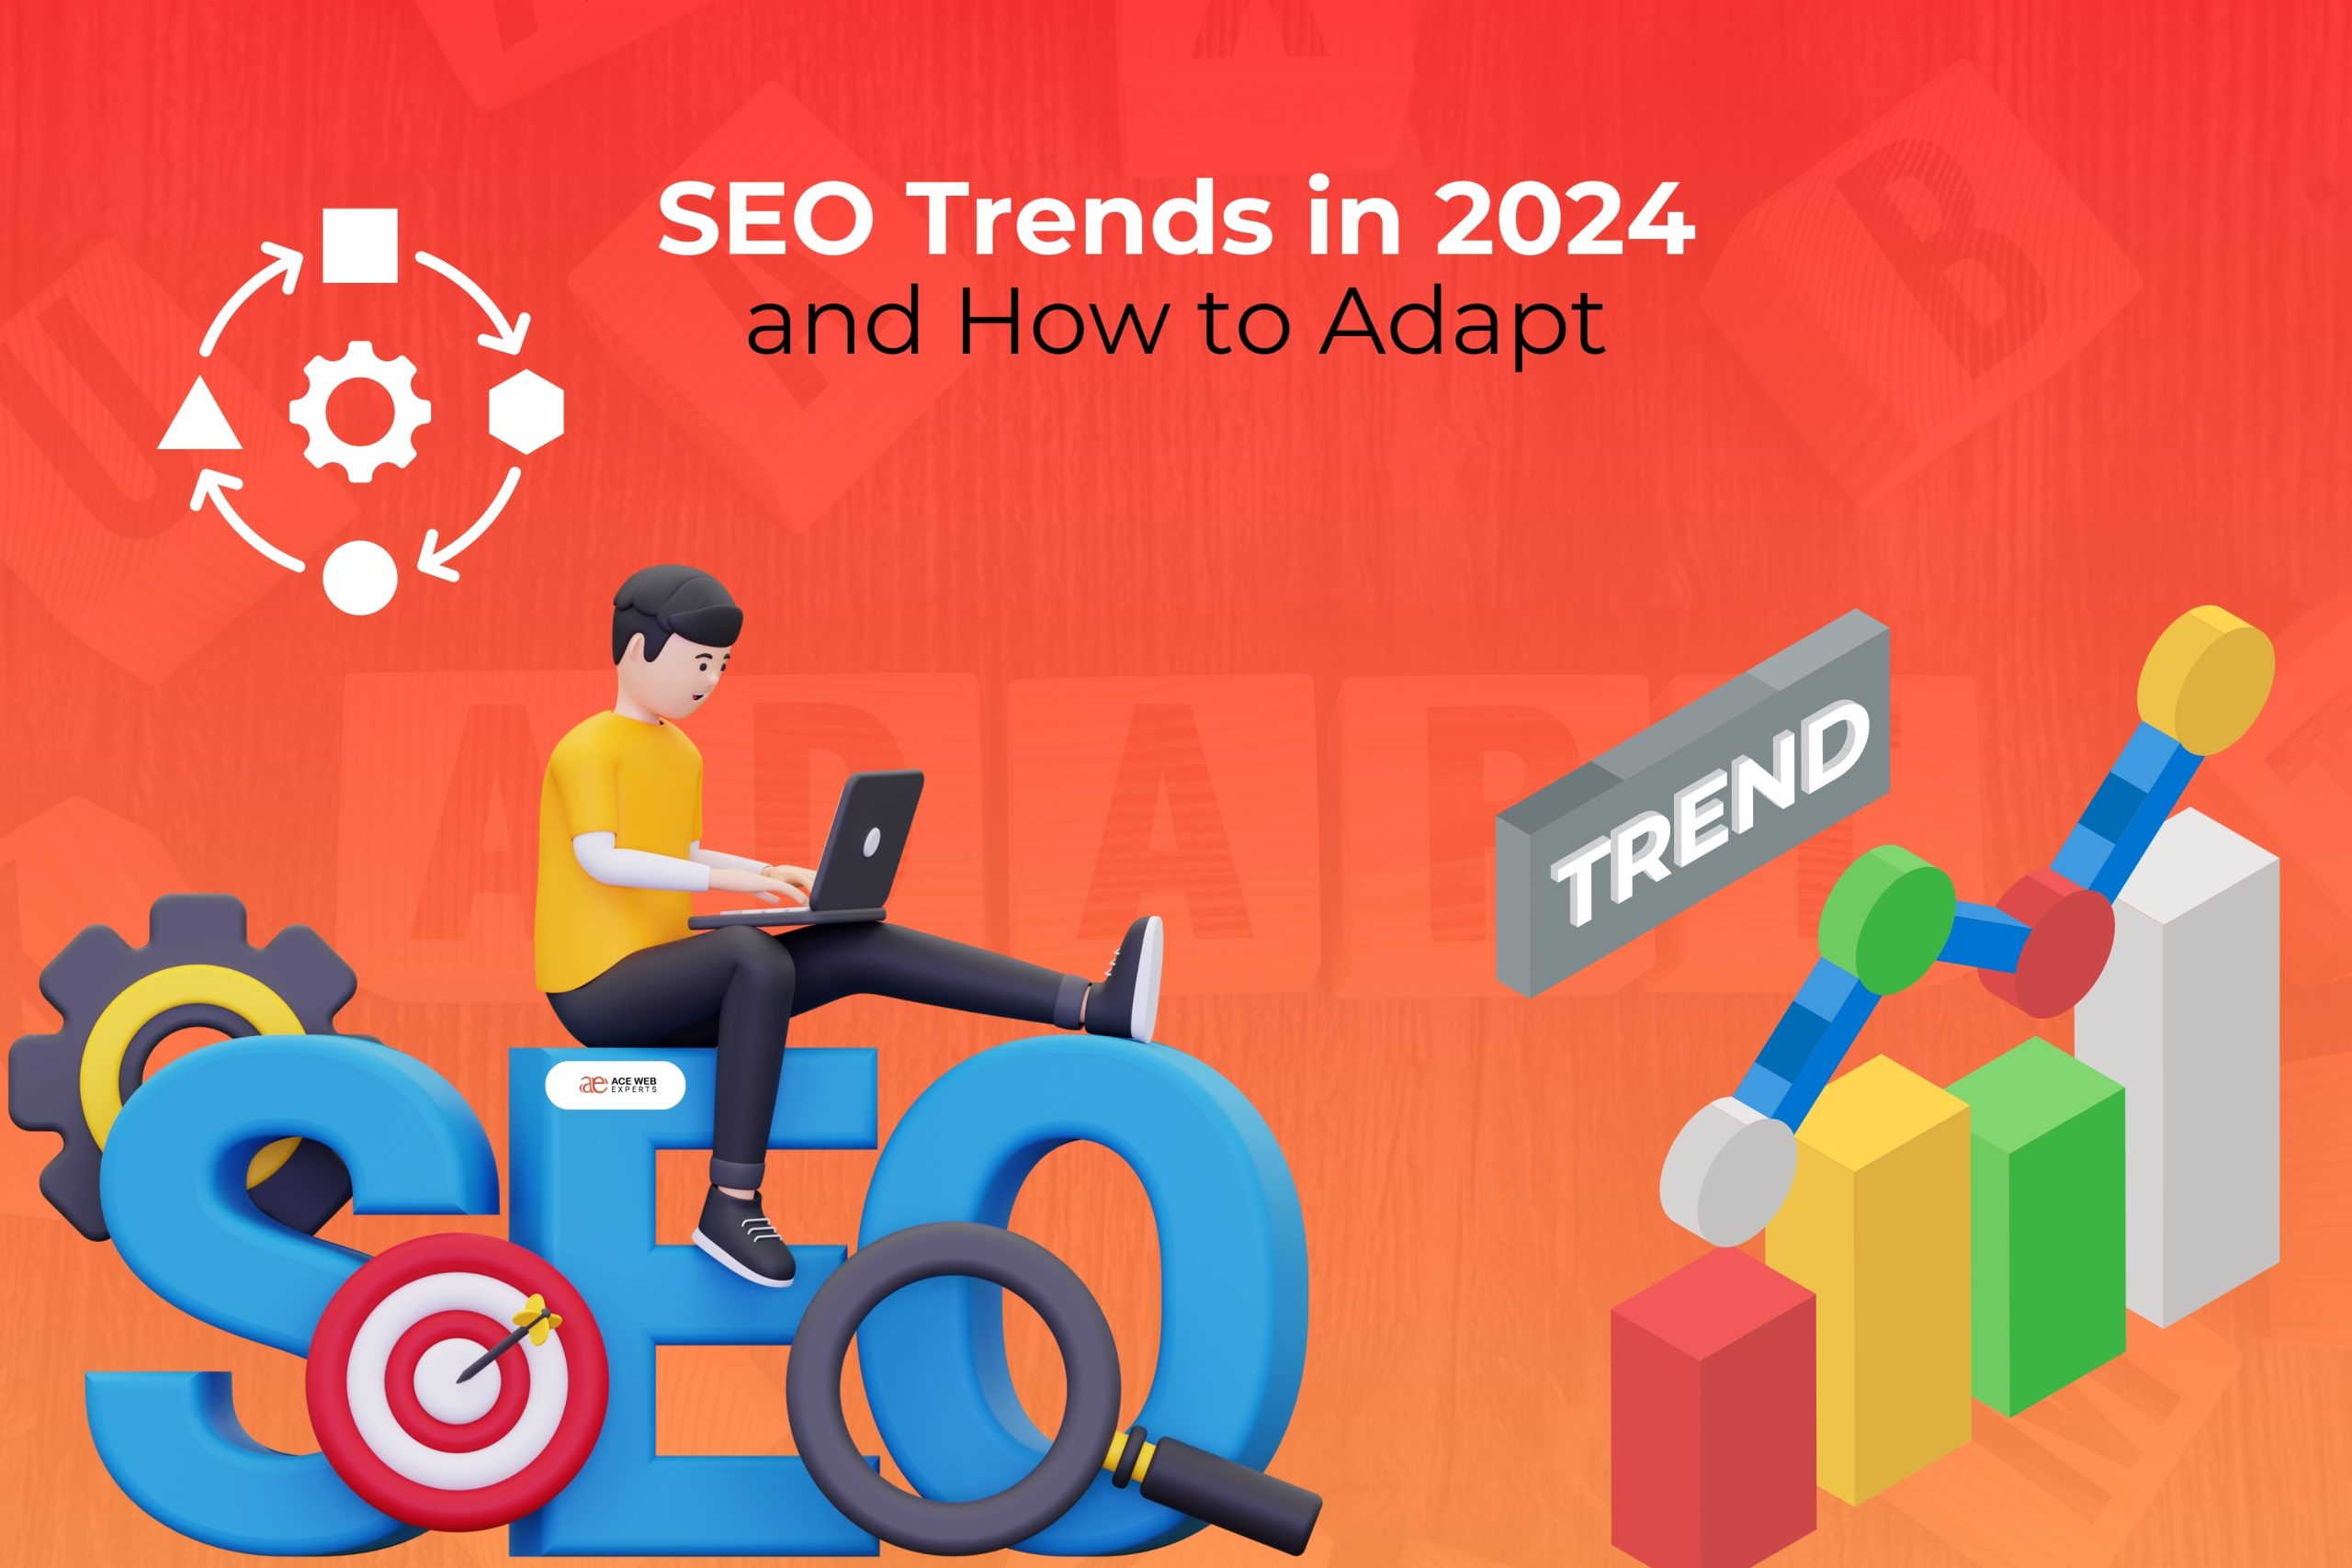 SEO Trends in 2024 and How to Adapt